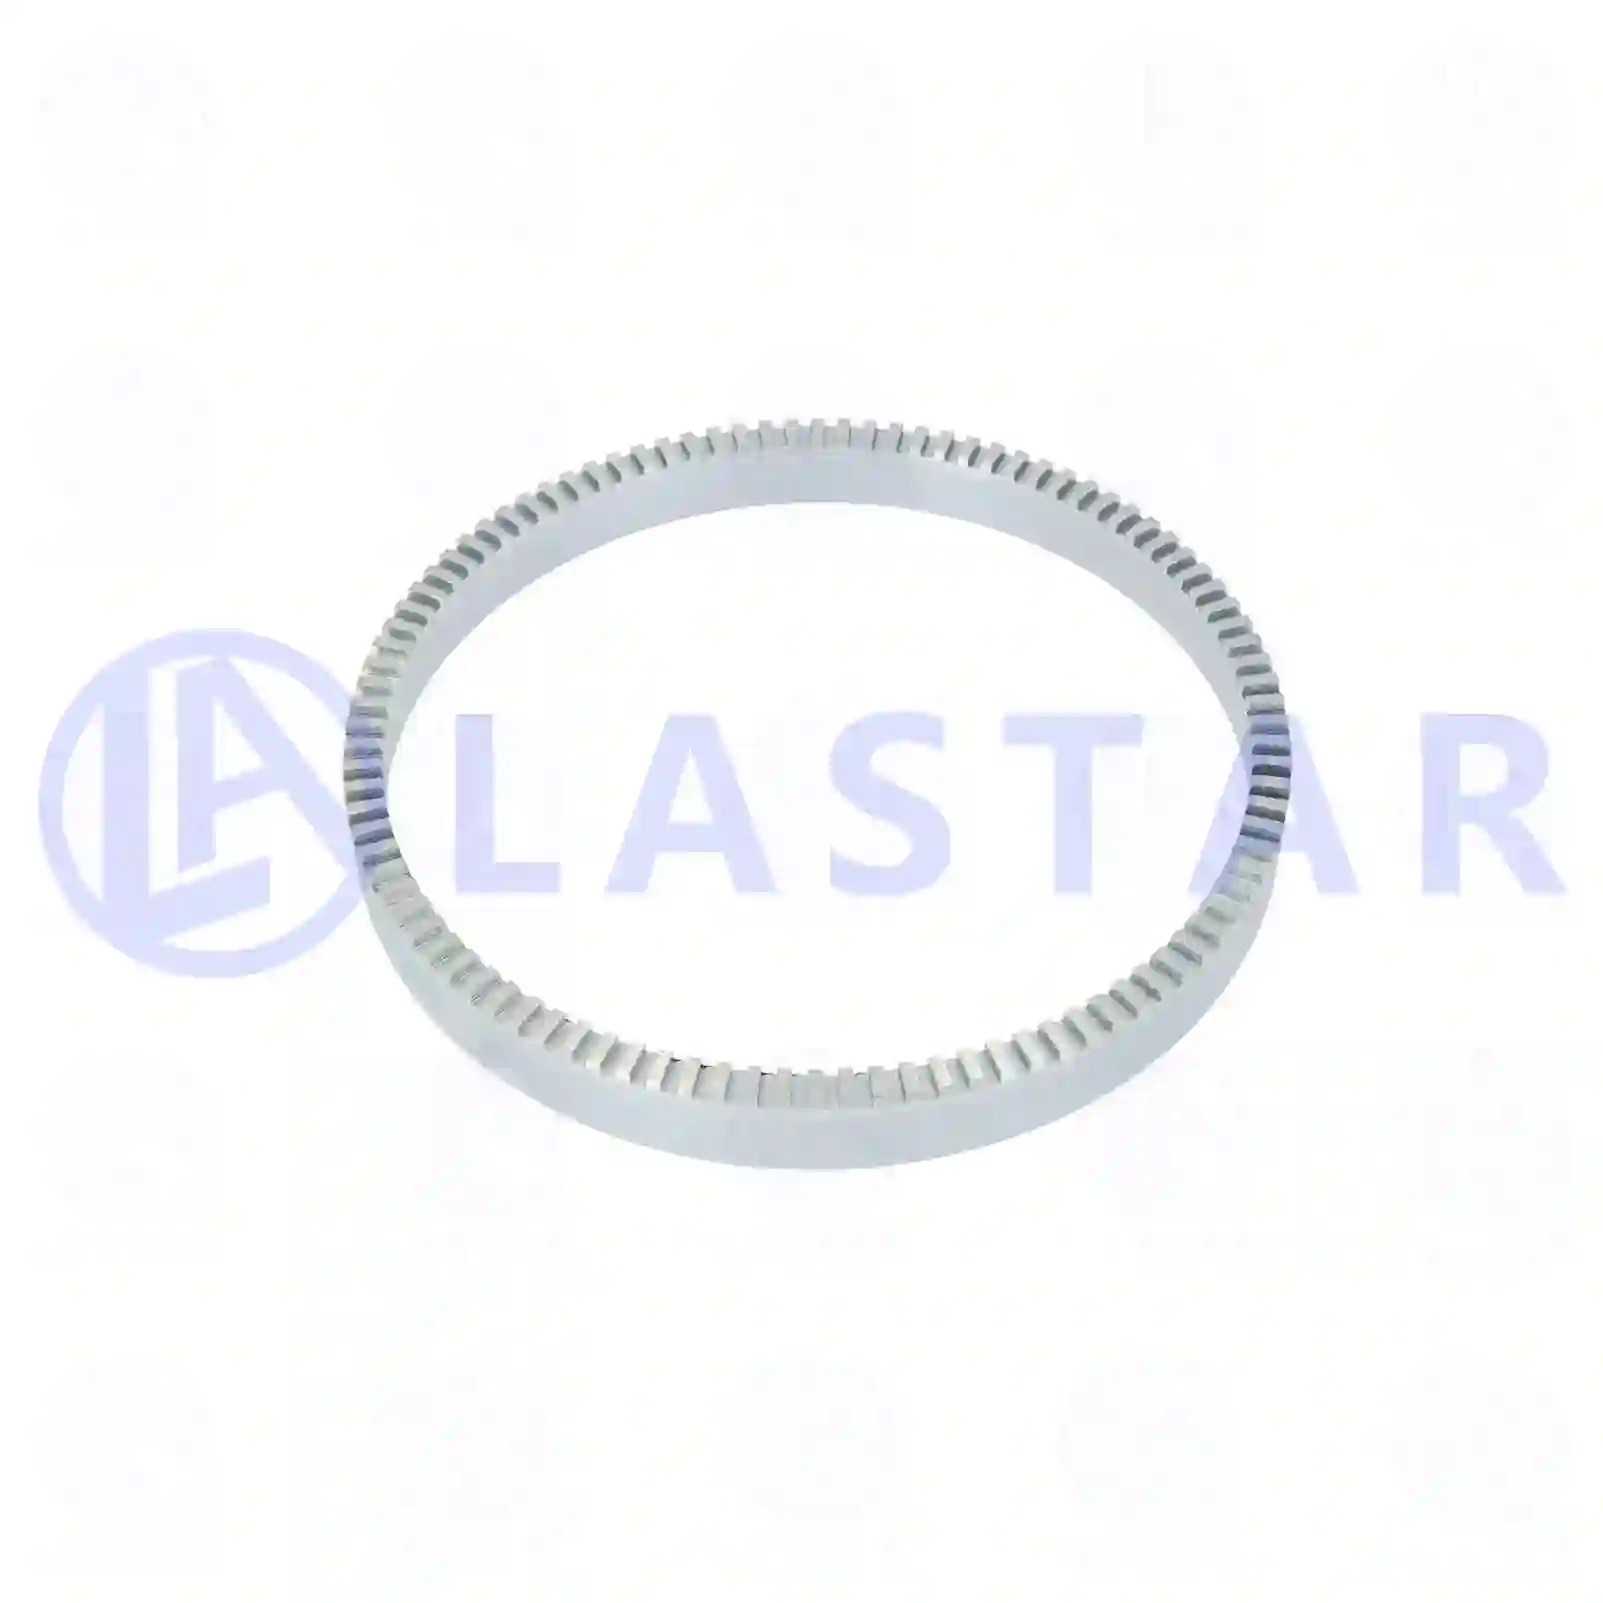 ABS ring, 77726879, 1349016, , ||  77726879 Lastar Spare Part | Truck Spare Parts, Auotomotive Spare Parts ABS ring, 77726879, 1349016, , ||  77726879 Lastar Spare Part | Truck Spare Parts, Auotomotive Spare Parts